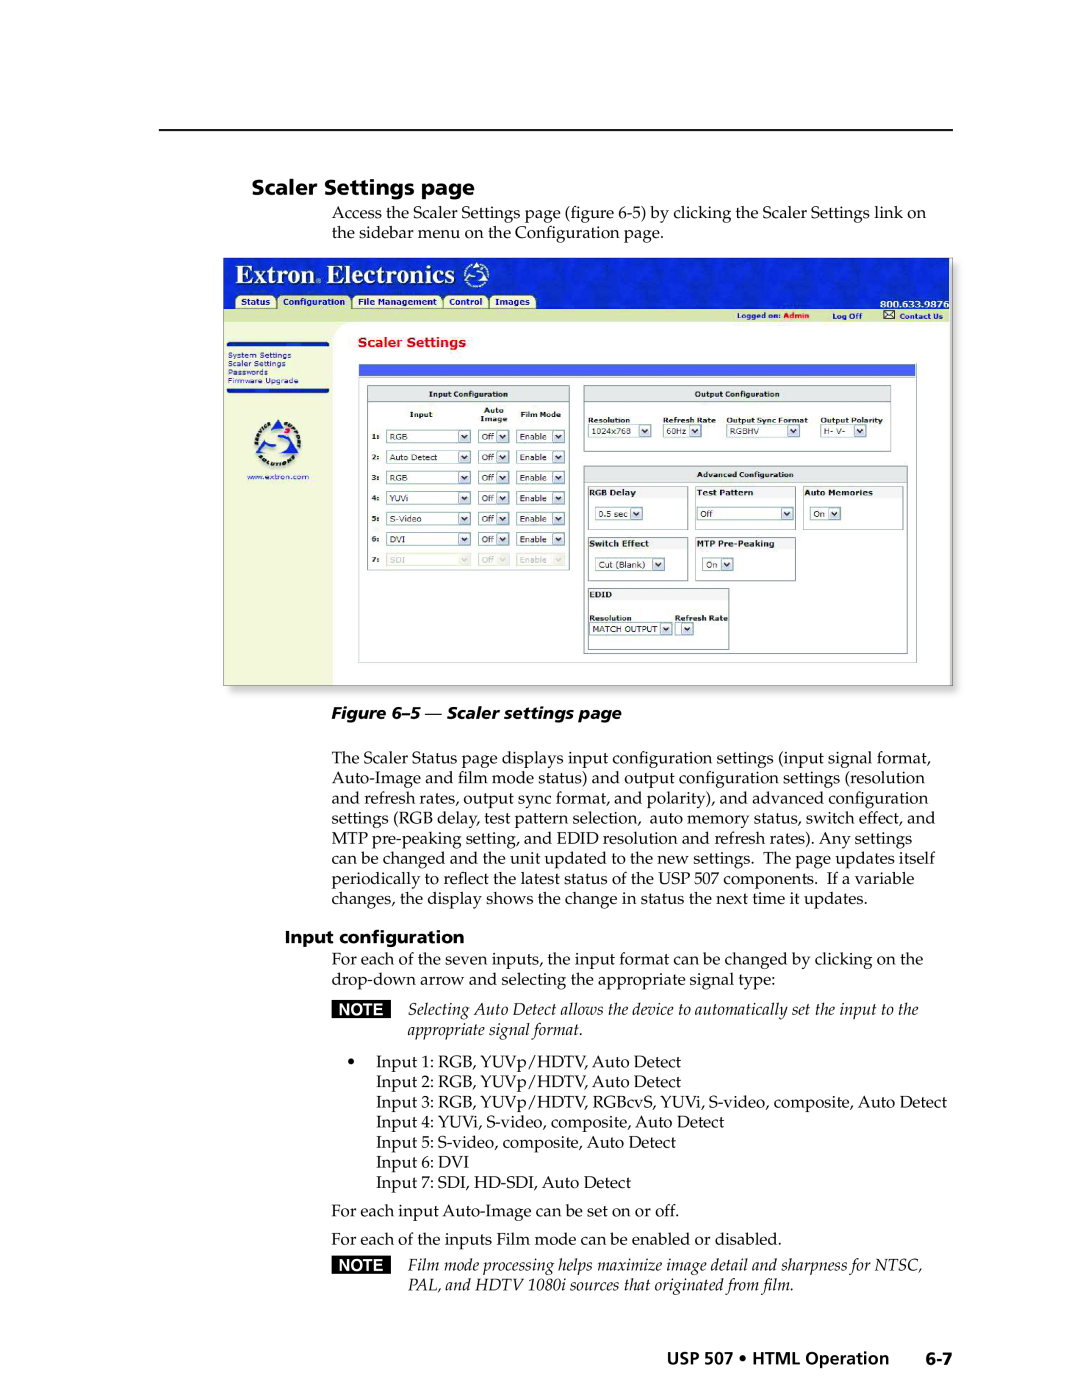 Extron electronic manual Scaler Settings page, 5 — Scaler settings page, Input configuration, USP 507 • HTML Operation 